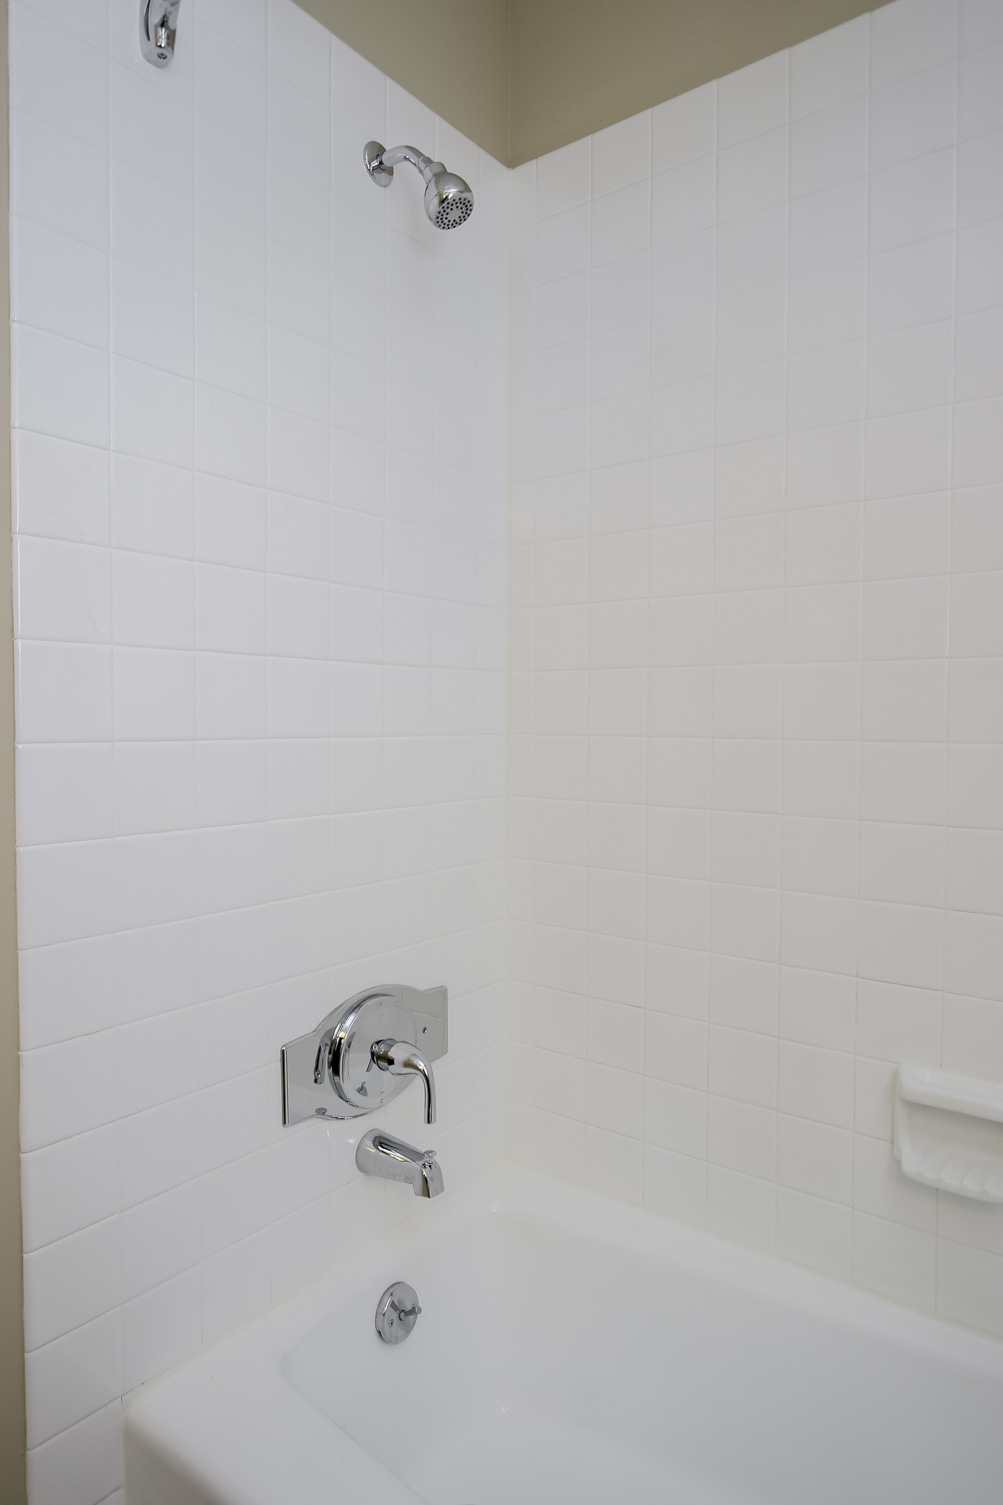 Large Soaking Tub In Master Bathroom with A Tile Surround